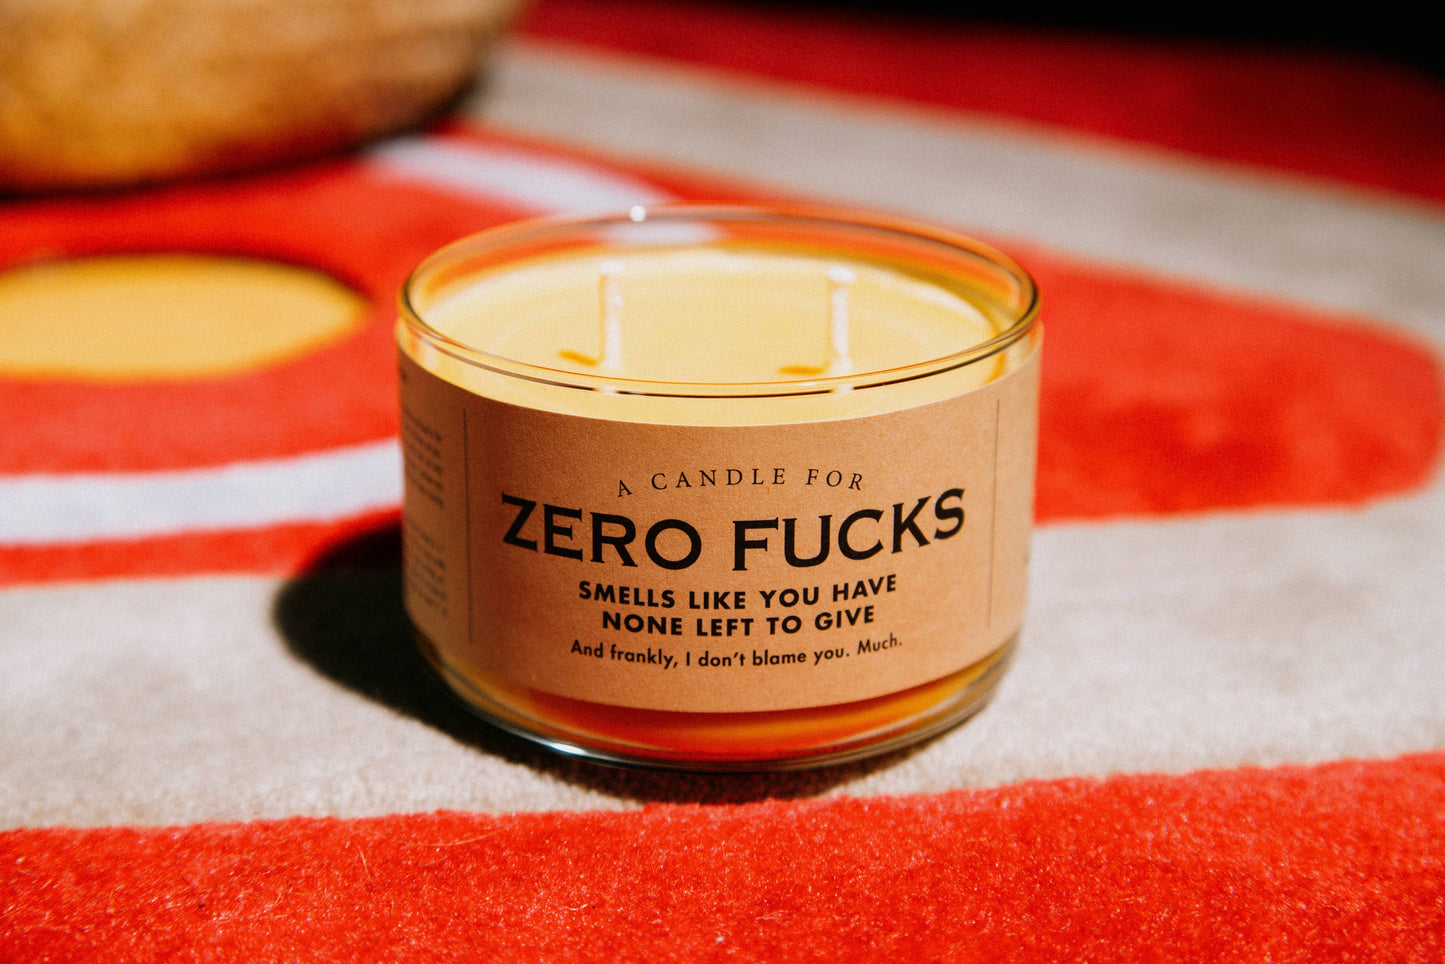 A Candle for Zero Fucks | Funny Candle